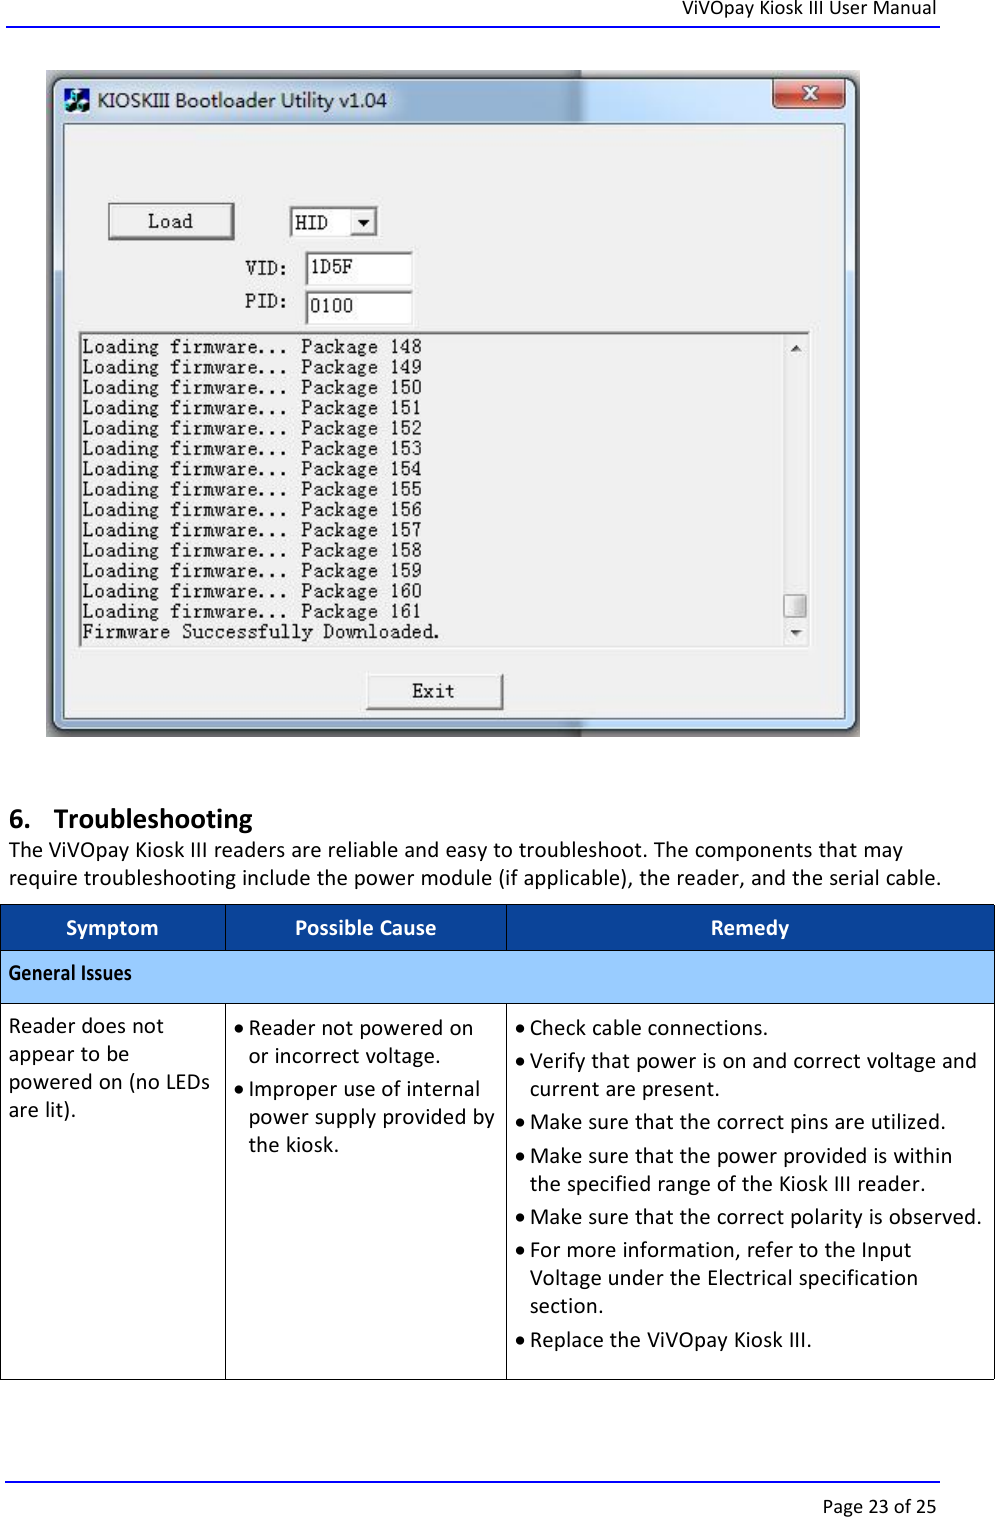 ViVOpay Kiosk III User ManualPage 23 of 256. TroubleshootingThe ViVOpay Kiosk III readers are reliable and easy to troubleshoot. The components that mayrequire troubleshooting include the power module (if applicable), the reader, and the serial cable.SymptomPossible CauseRemedyGeneral IssuesReader does notappear to bepowered on (no LEDsare lit).Reader not powered onor incorrect voltage.Improper use of internalpower supply provided bythe kiosk.Check cable connections.Verify that power is on and correct voltage andcurrent are present.Make sure that the correct pins are utilized.Make sure that the power provided is withinthe specified range of the Kiosk III reader.Make sure that the correct polarity is observed.For more information, refer to the InputVoltage under the Electrical specificationsection.Replace the ViVOpay Kiosk III.